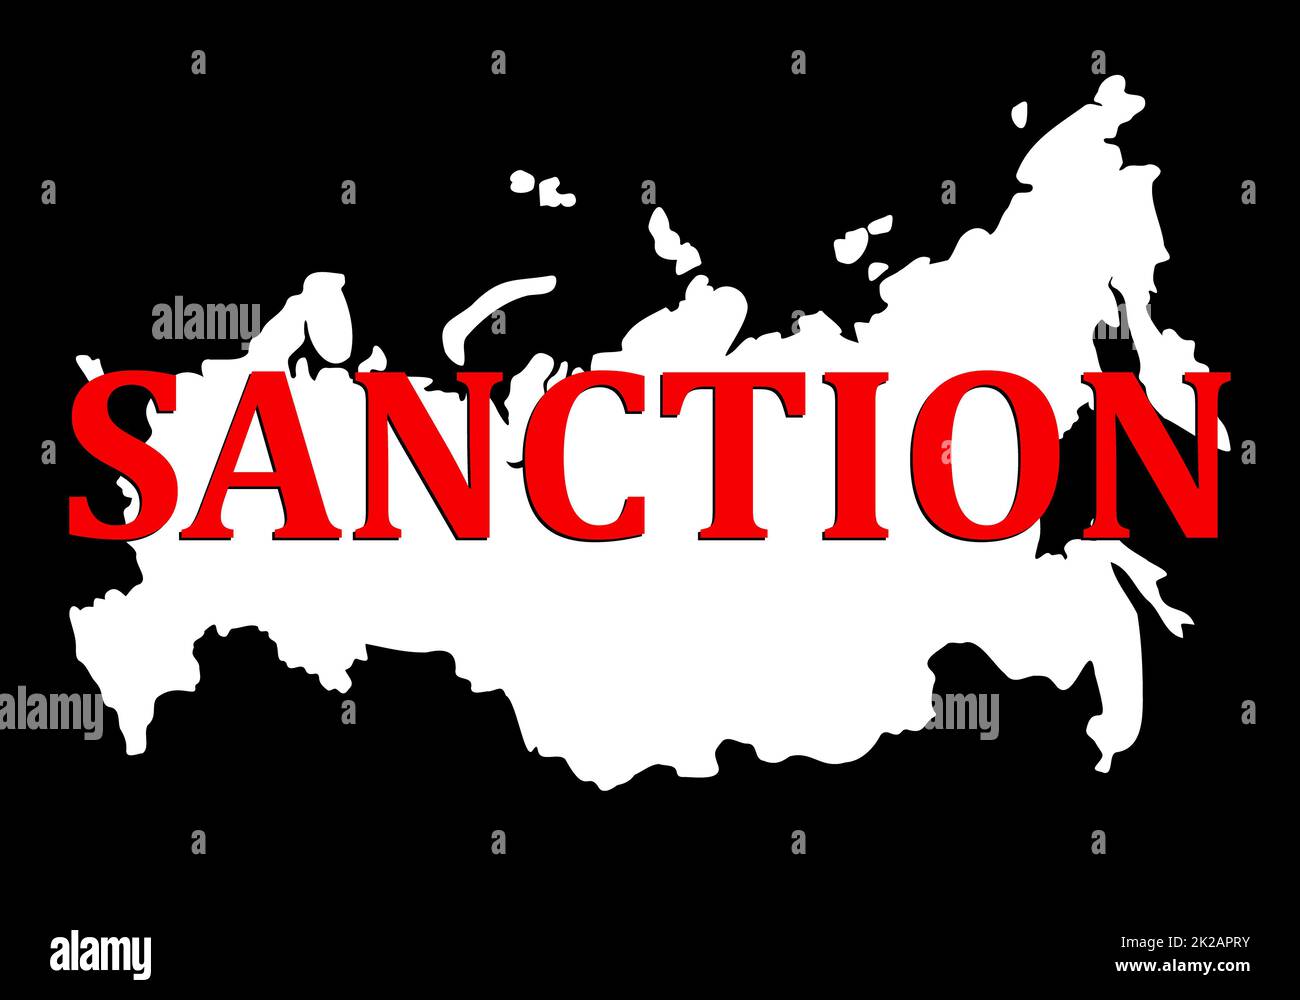 Sanctions against Russia. Silhouette of map of Russian federation with red text sanction. Collapse and destruction of the state because of Putin's rule and attacks on a neighboring country - Ukraine. Stock Photo